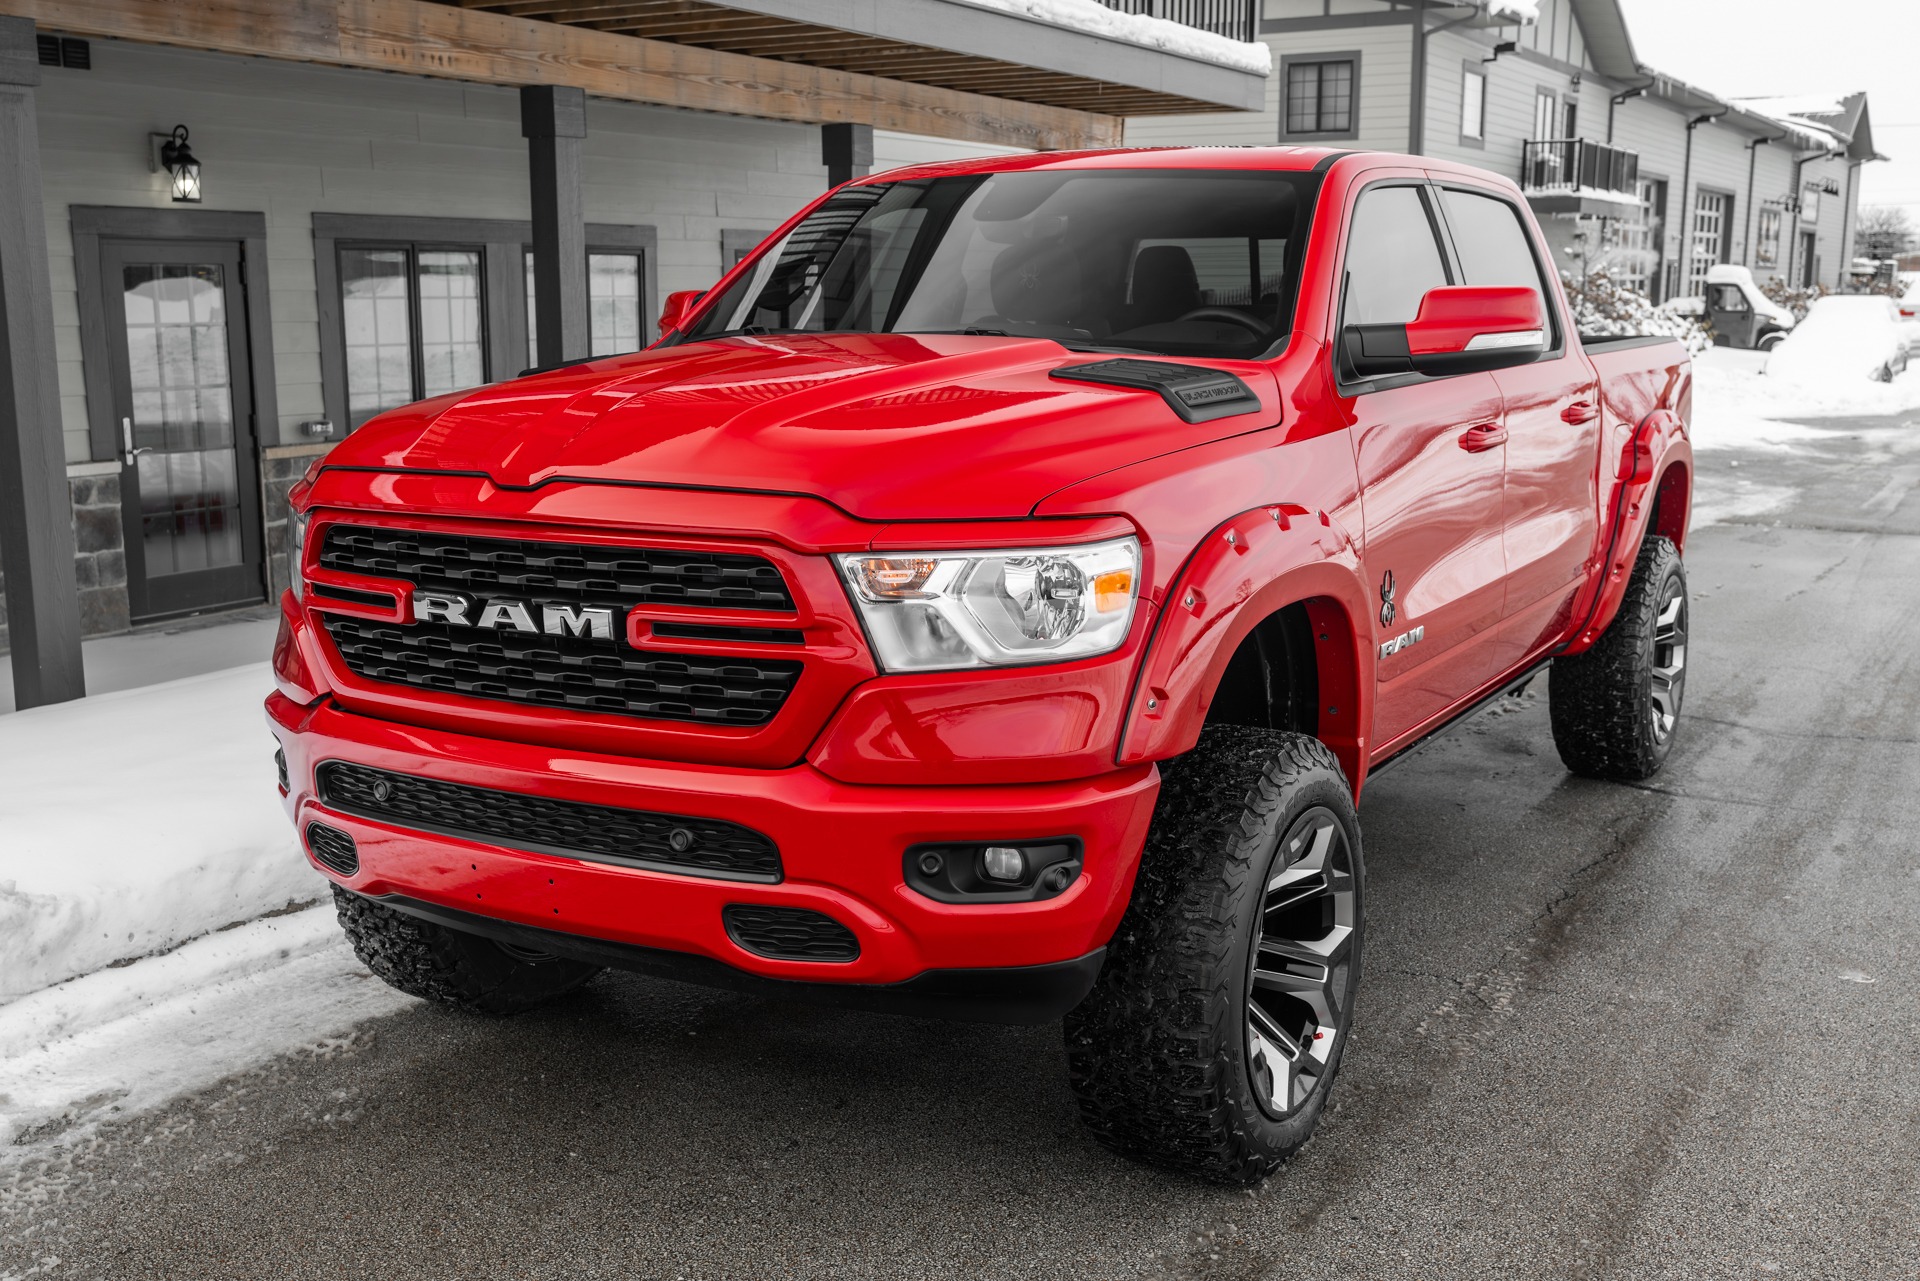 Used-2022-Ram-1500-Big-Horn-Black-Widow-4x4-ONLY-178-Miles-57-Hemi-V8-Pano-Roof-LOADED